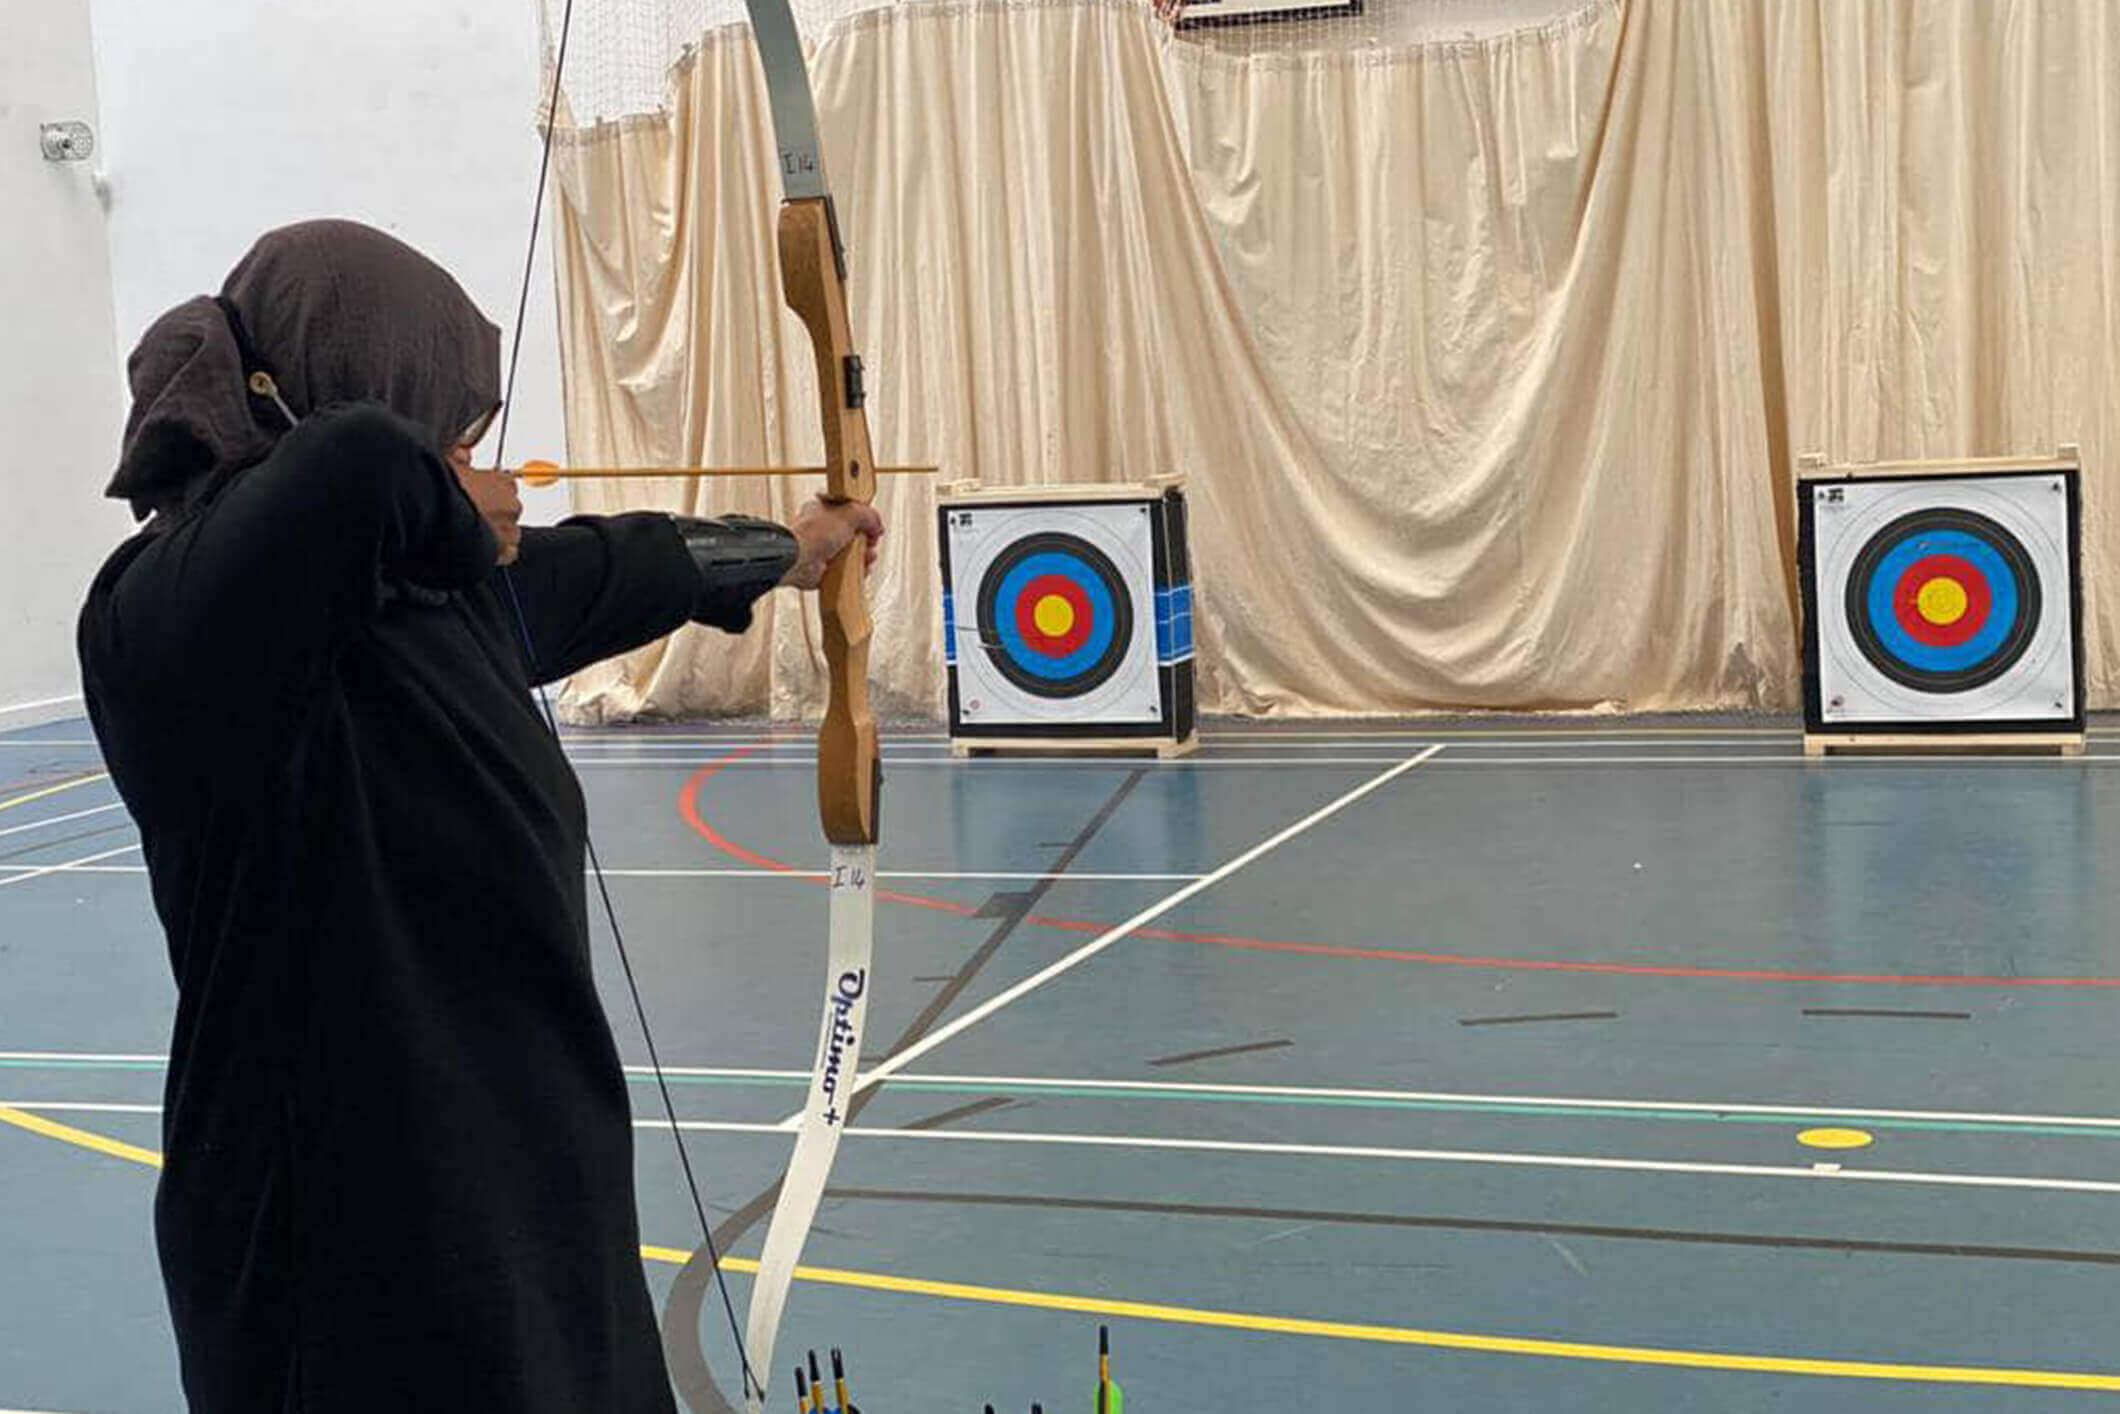 Free Archery Lessons Will Be Given At A Mosque In Stoke